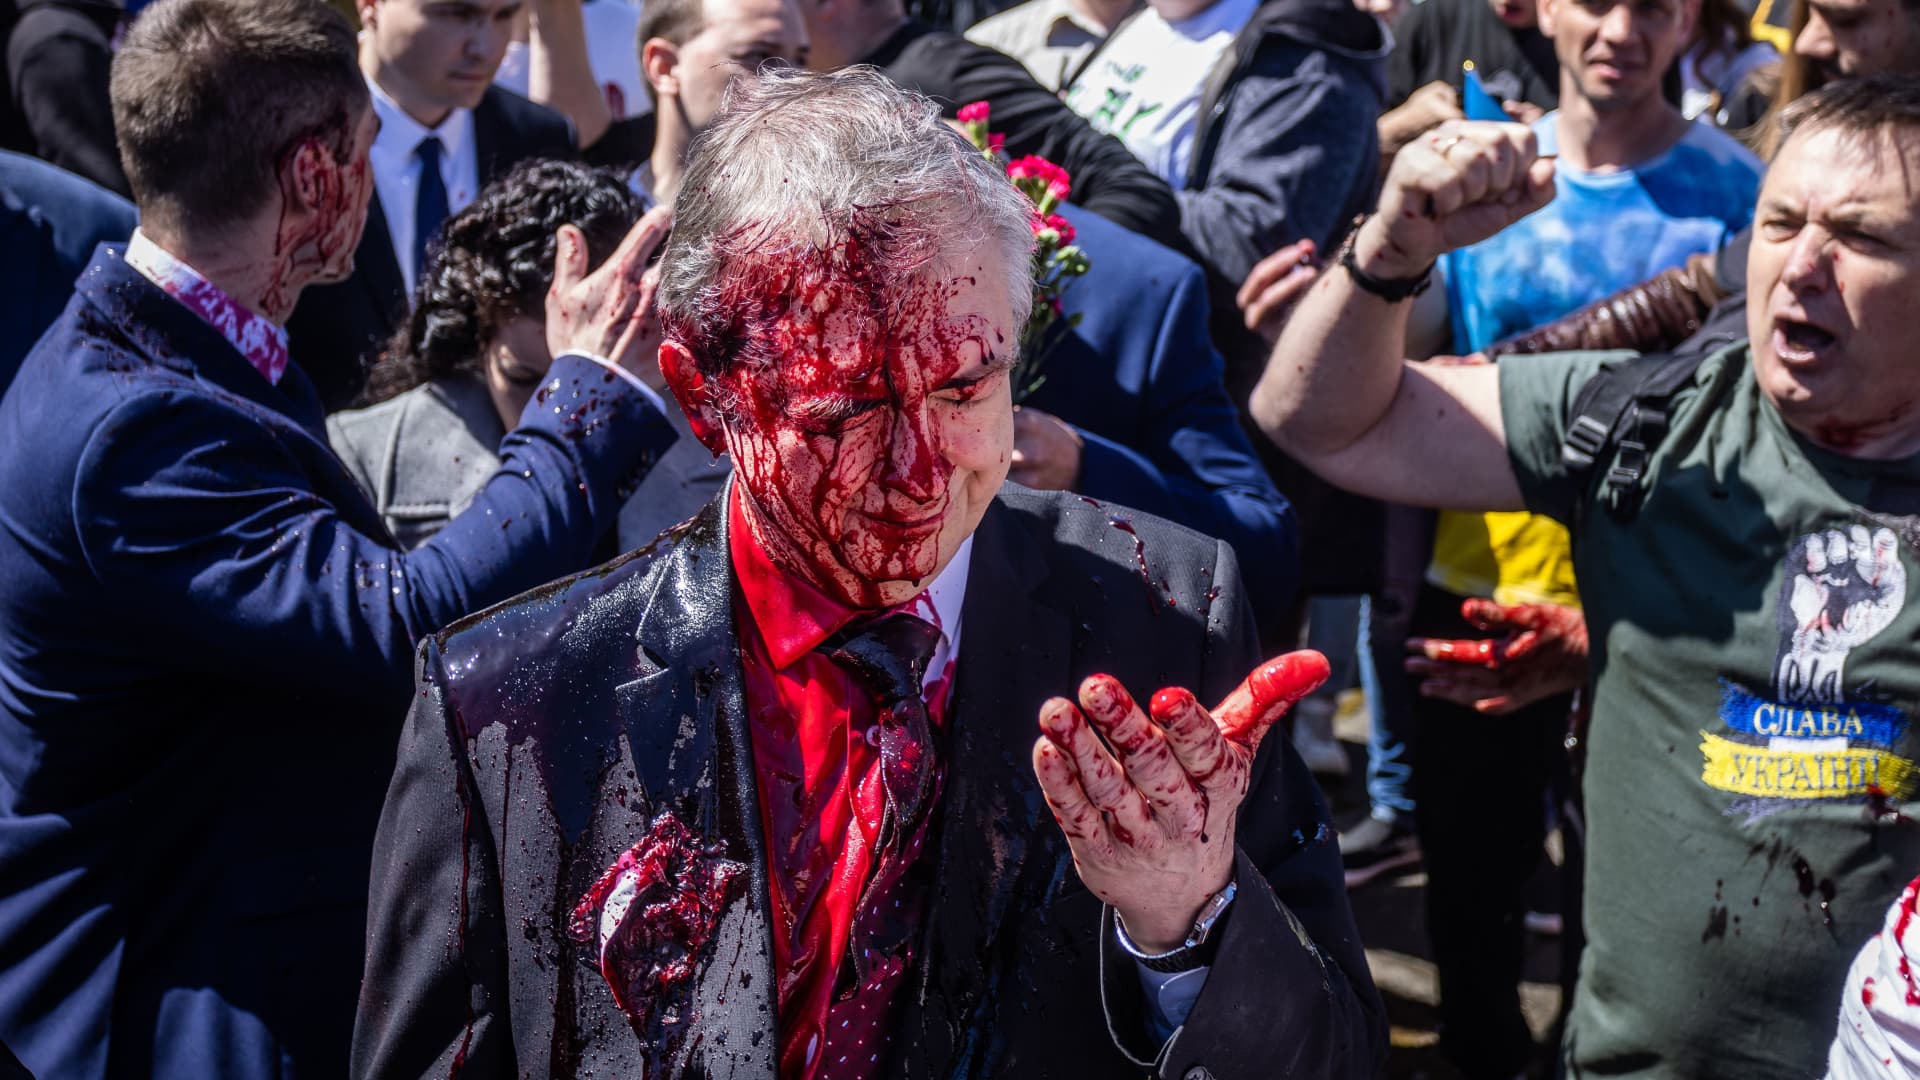 Russian Ambassador to Poland, Ambassador Sergey Andreev reacts after being covered with red paint during a protest prior a ceremony at the Soviet soldier war mausoleum in Warsaw, Poland on May 9, 2022, on the day of the 77th anniversary of the 1945 Soviet victory against Nazi Germany.